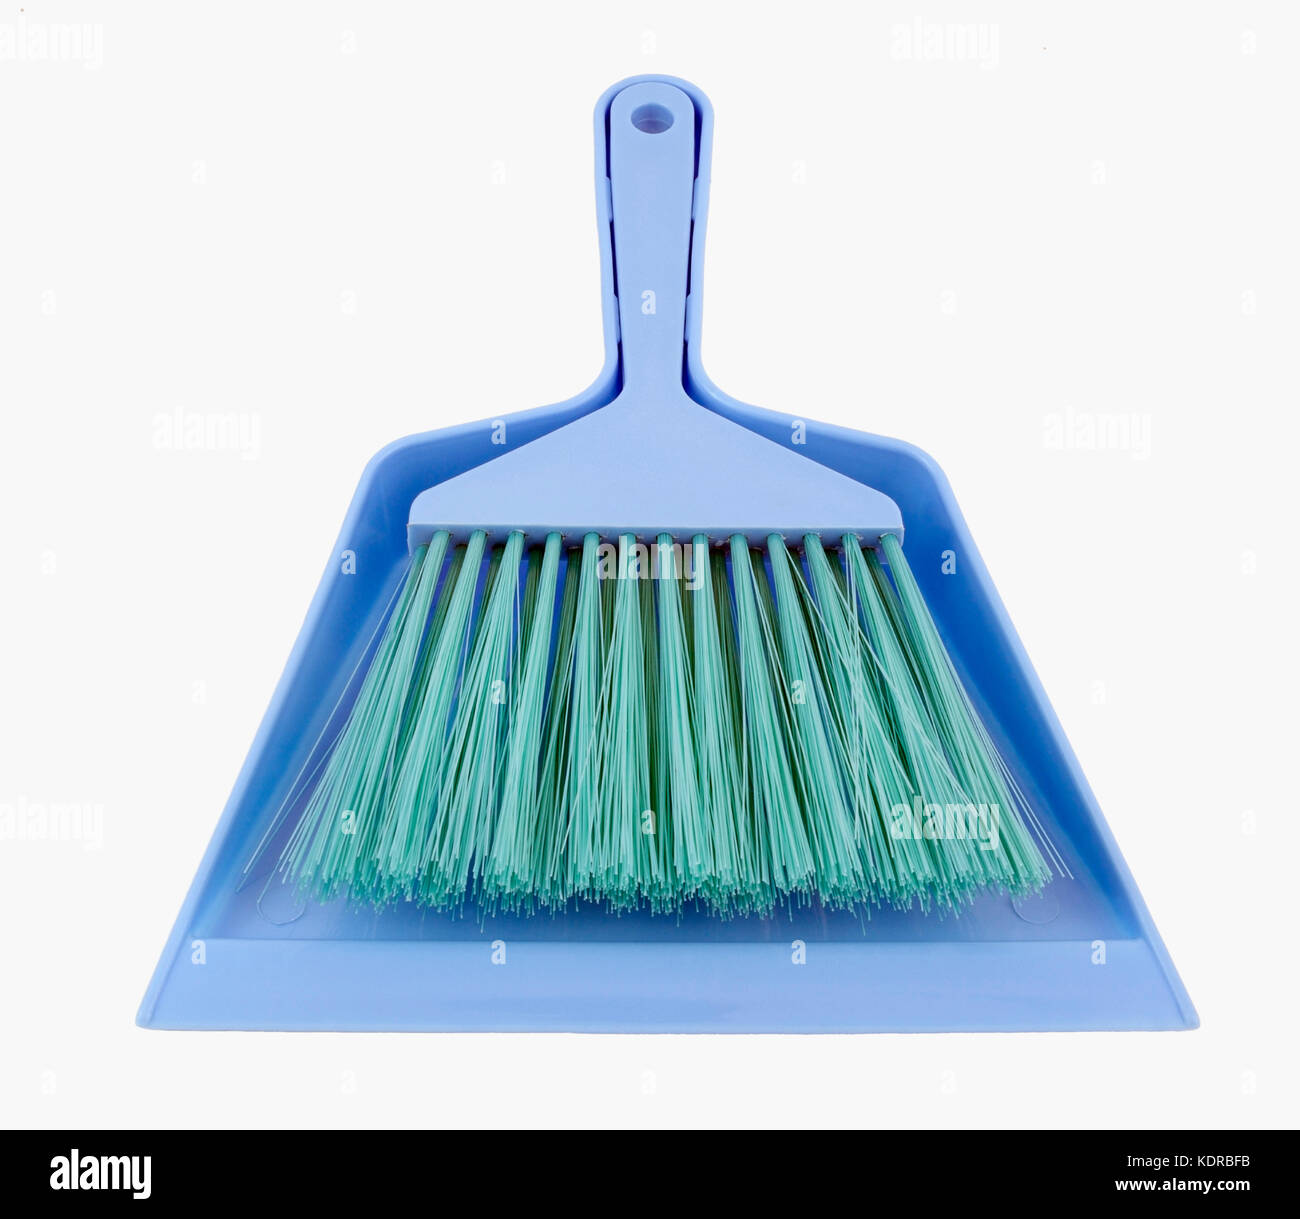 Simple inexpensive plastic dustpan and hand broom. Isolated. Stock Photo